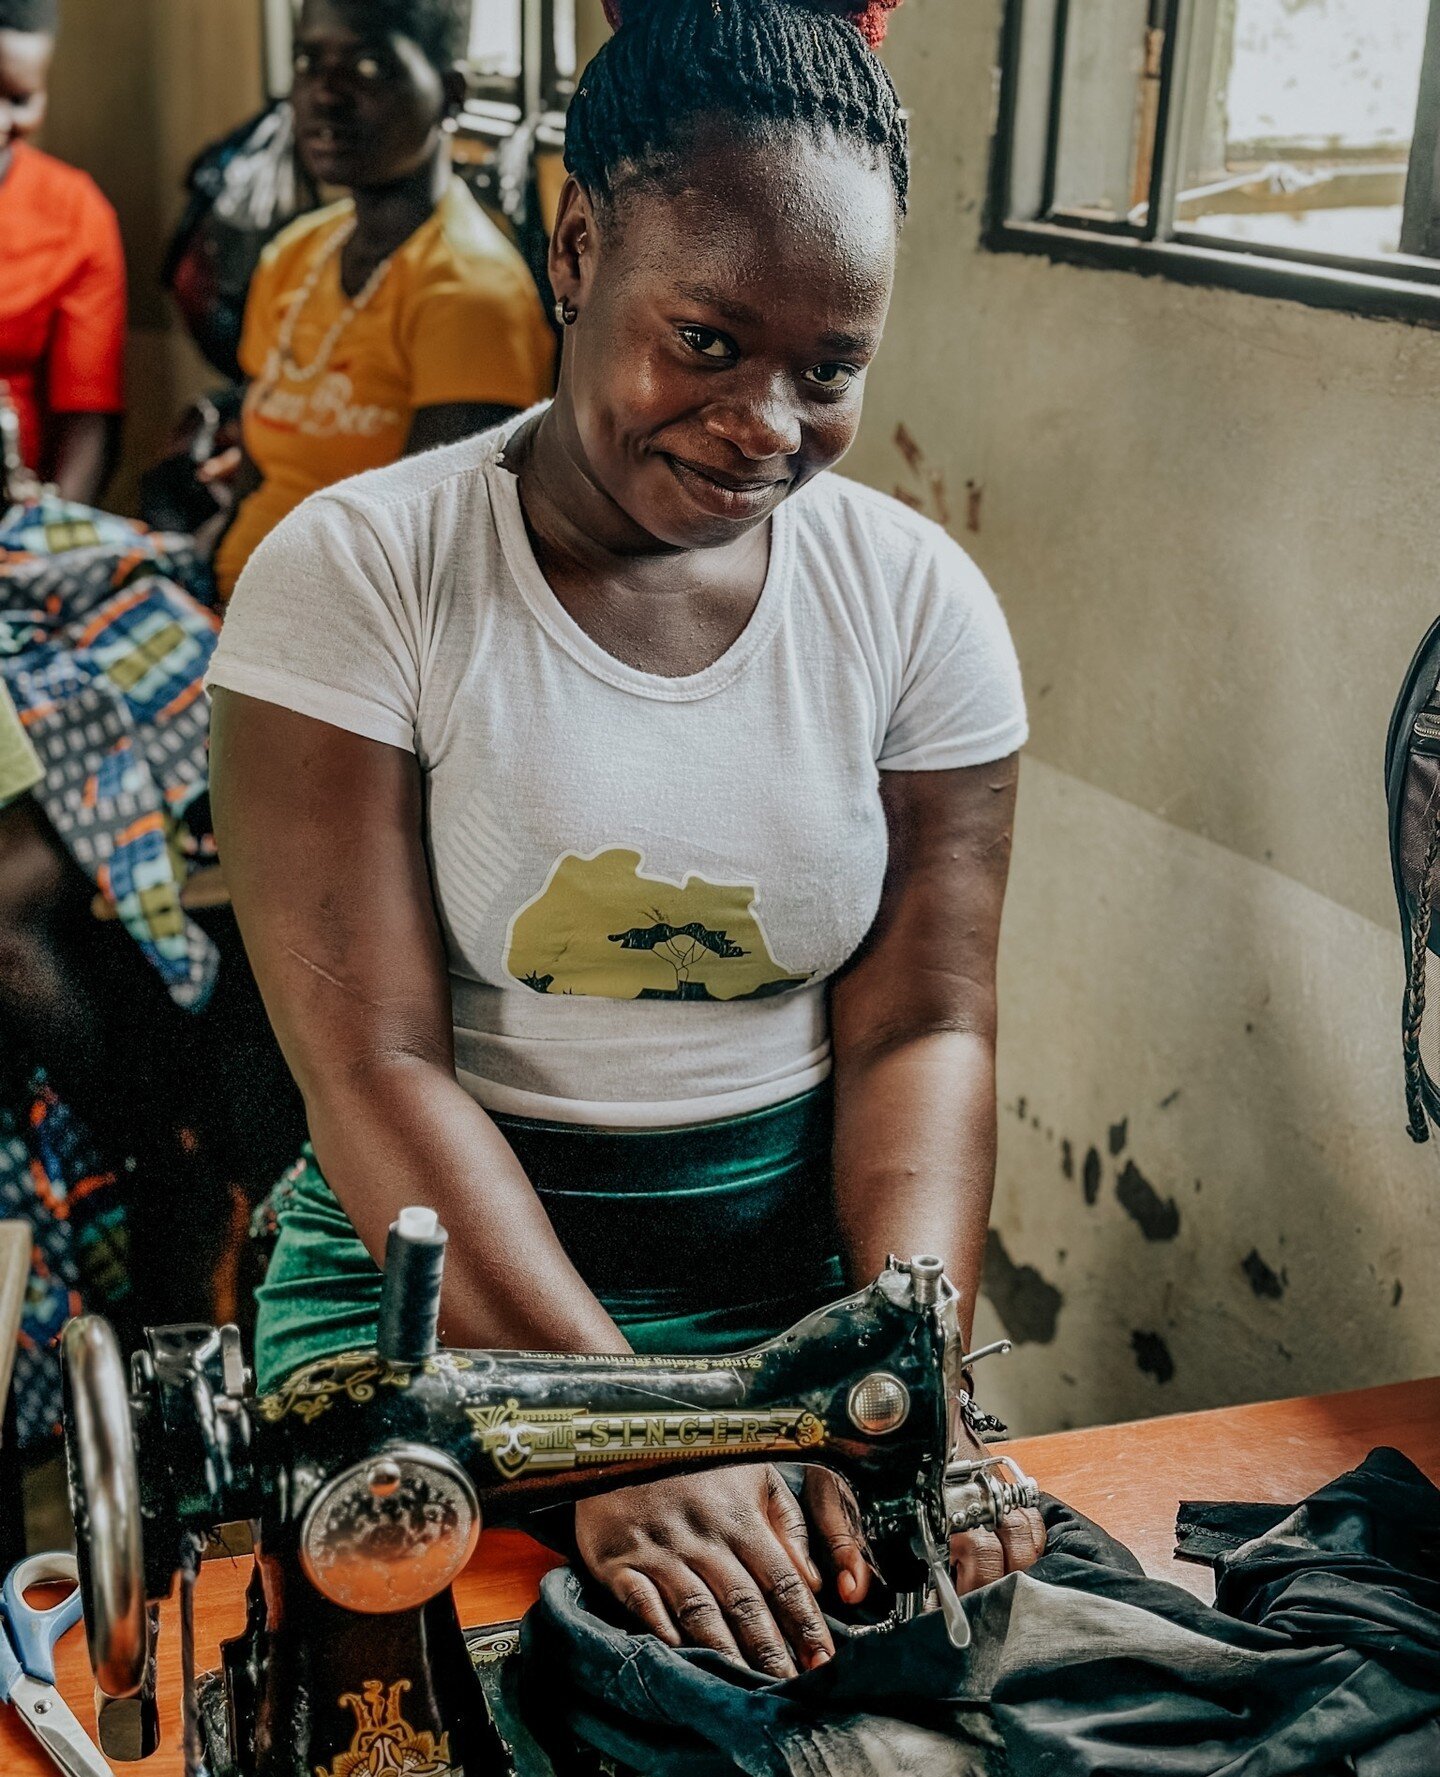 Want to make a greater impact? Empower a woman. Research shows an empowered woman impacts at least four people around her.⁠
⁠
In developing countries, women lack equal opportunities to become self-sufficient for themselves and their families. YOU ARE